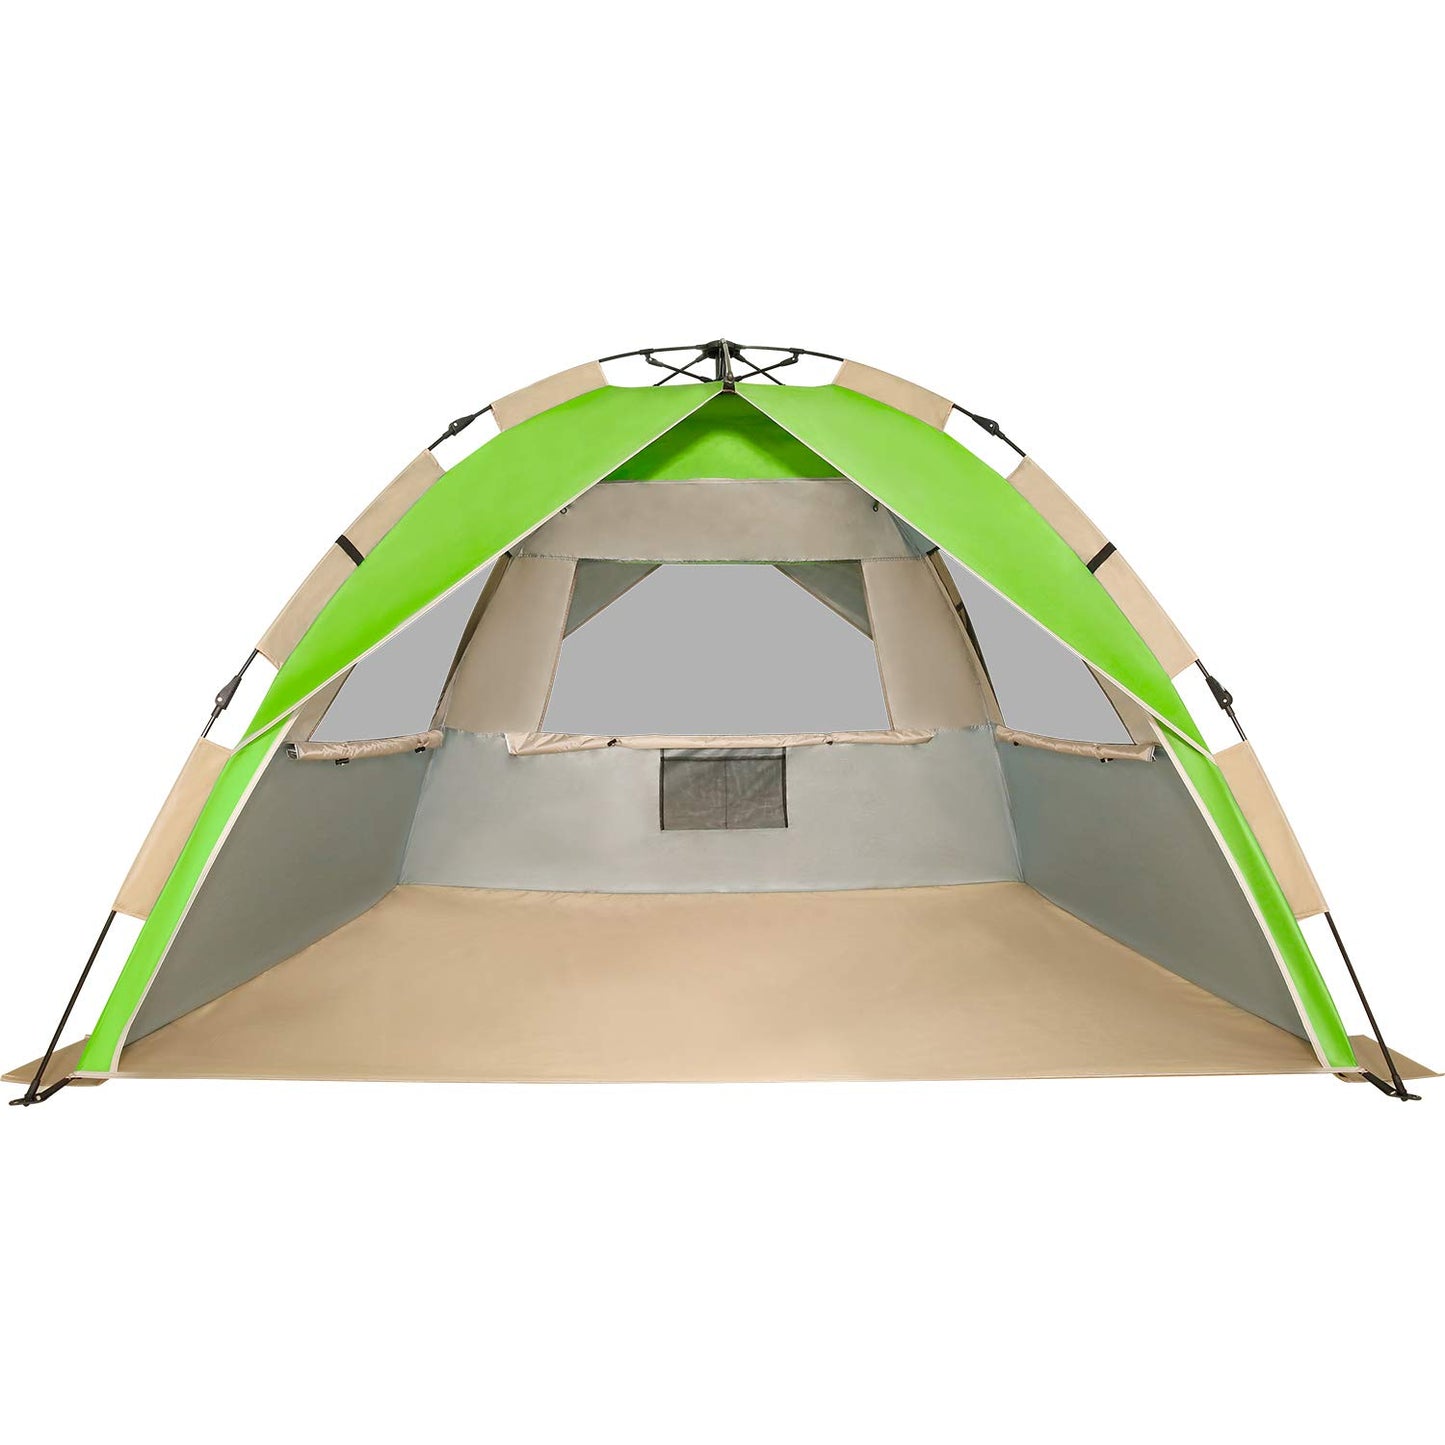 G4Free 3-4 Persons Set up Beach Tent